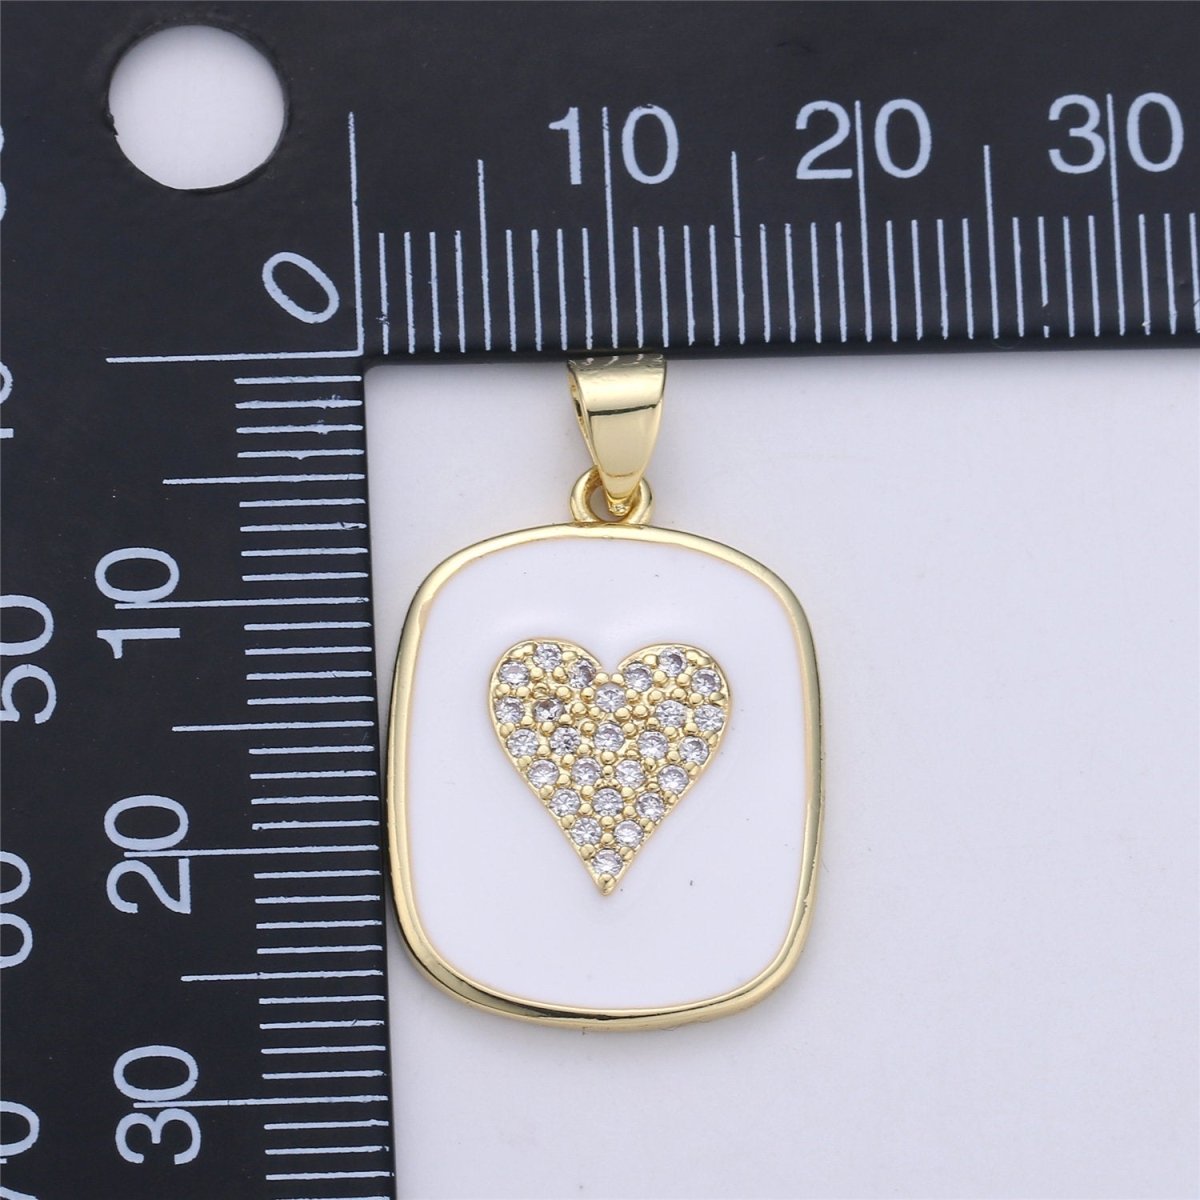 Gold Enamel Heart Charm Military Tag Pendant, Black White Love charm, Enamel Jewelry for Necklace Component I-448 I-449 - DLUXCA